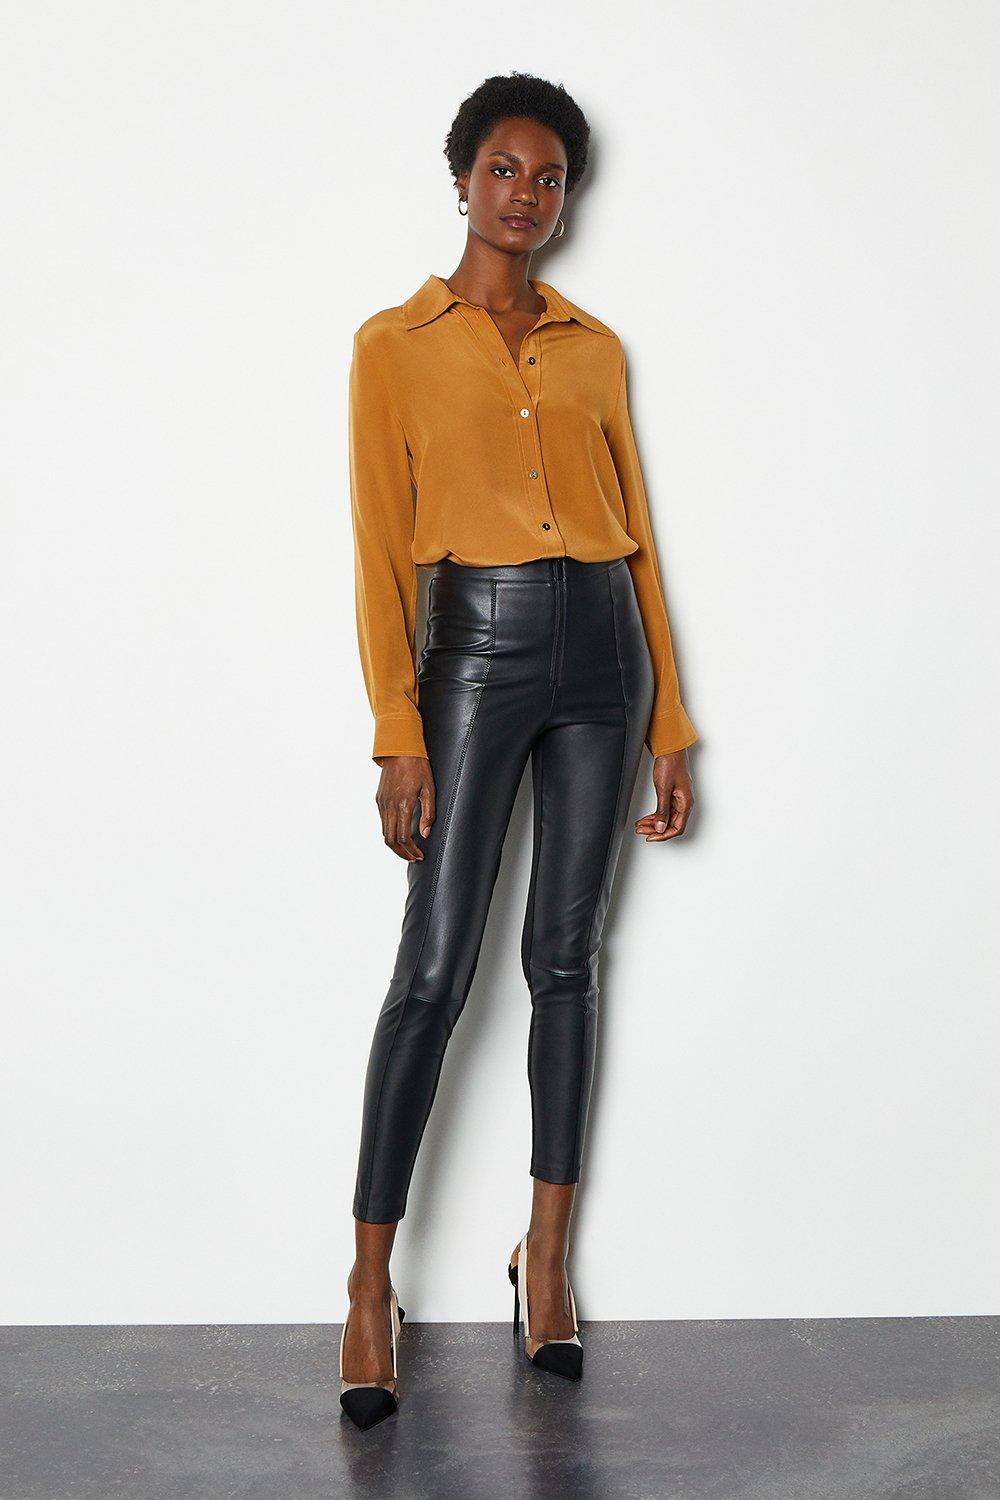 brown leather trousers